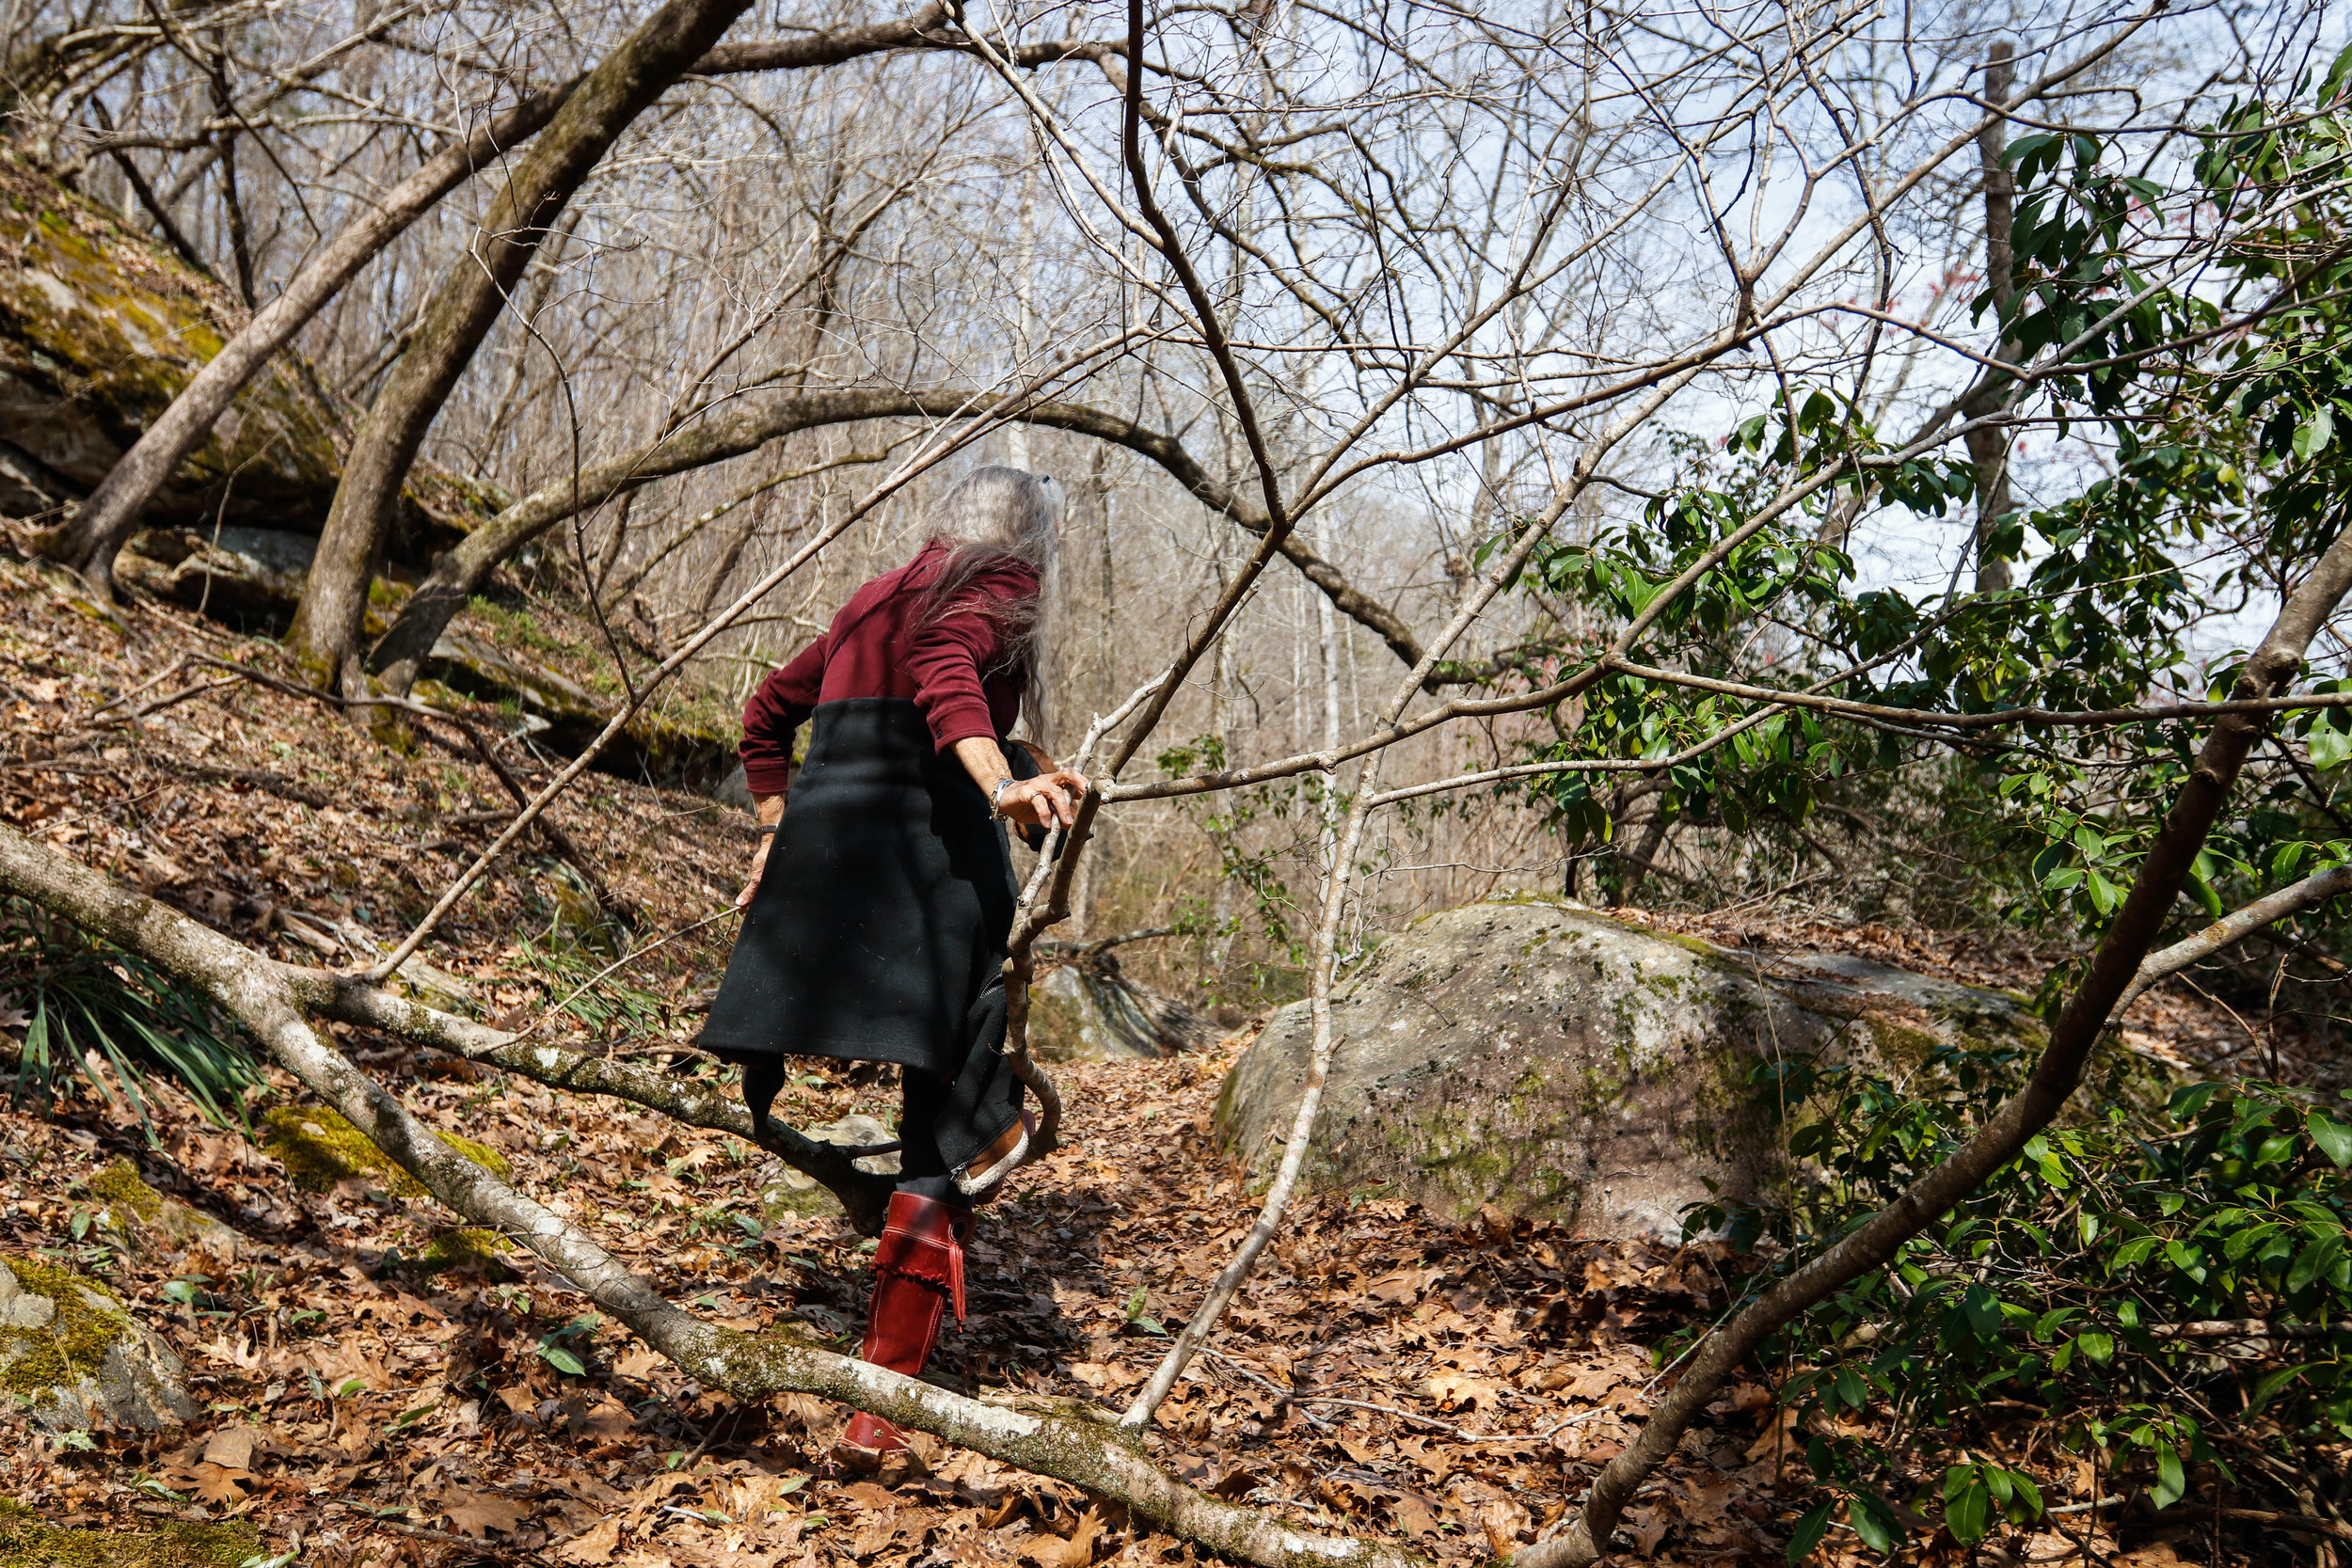  Tinsley takes a walk through the forest at Earthsong on Friday, March 16, 2018. "I like walking through the forest, the dark and deep woods," Tinsley said. From sleeping under the stars by the river to picking wildflowers to make tea, she spends muc